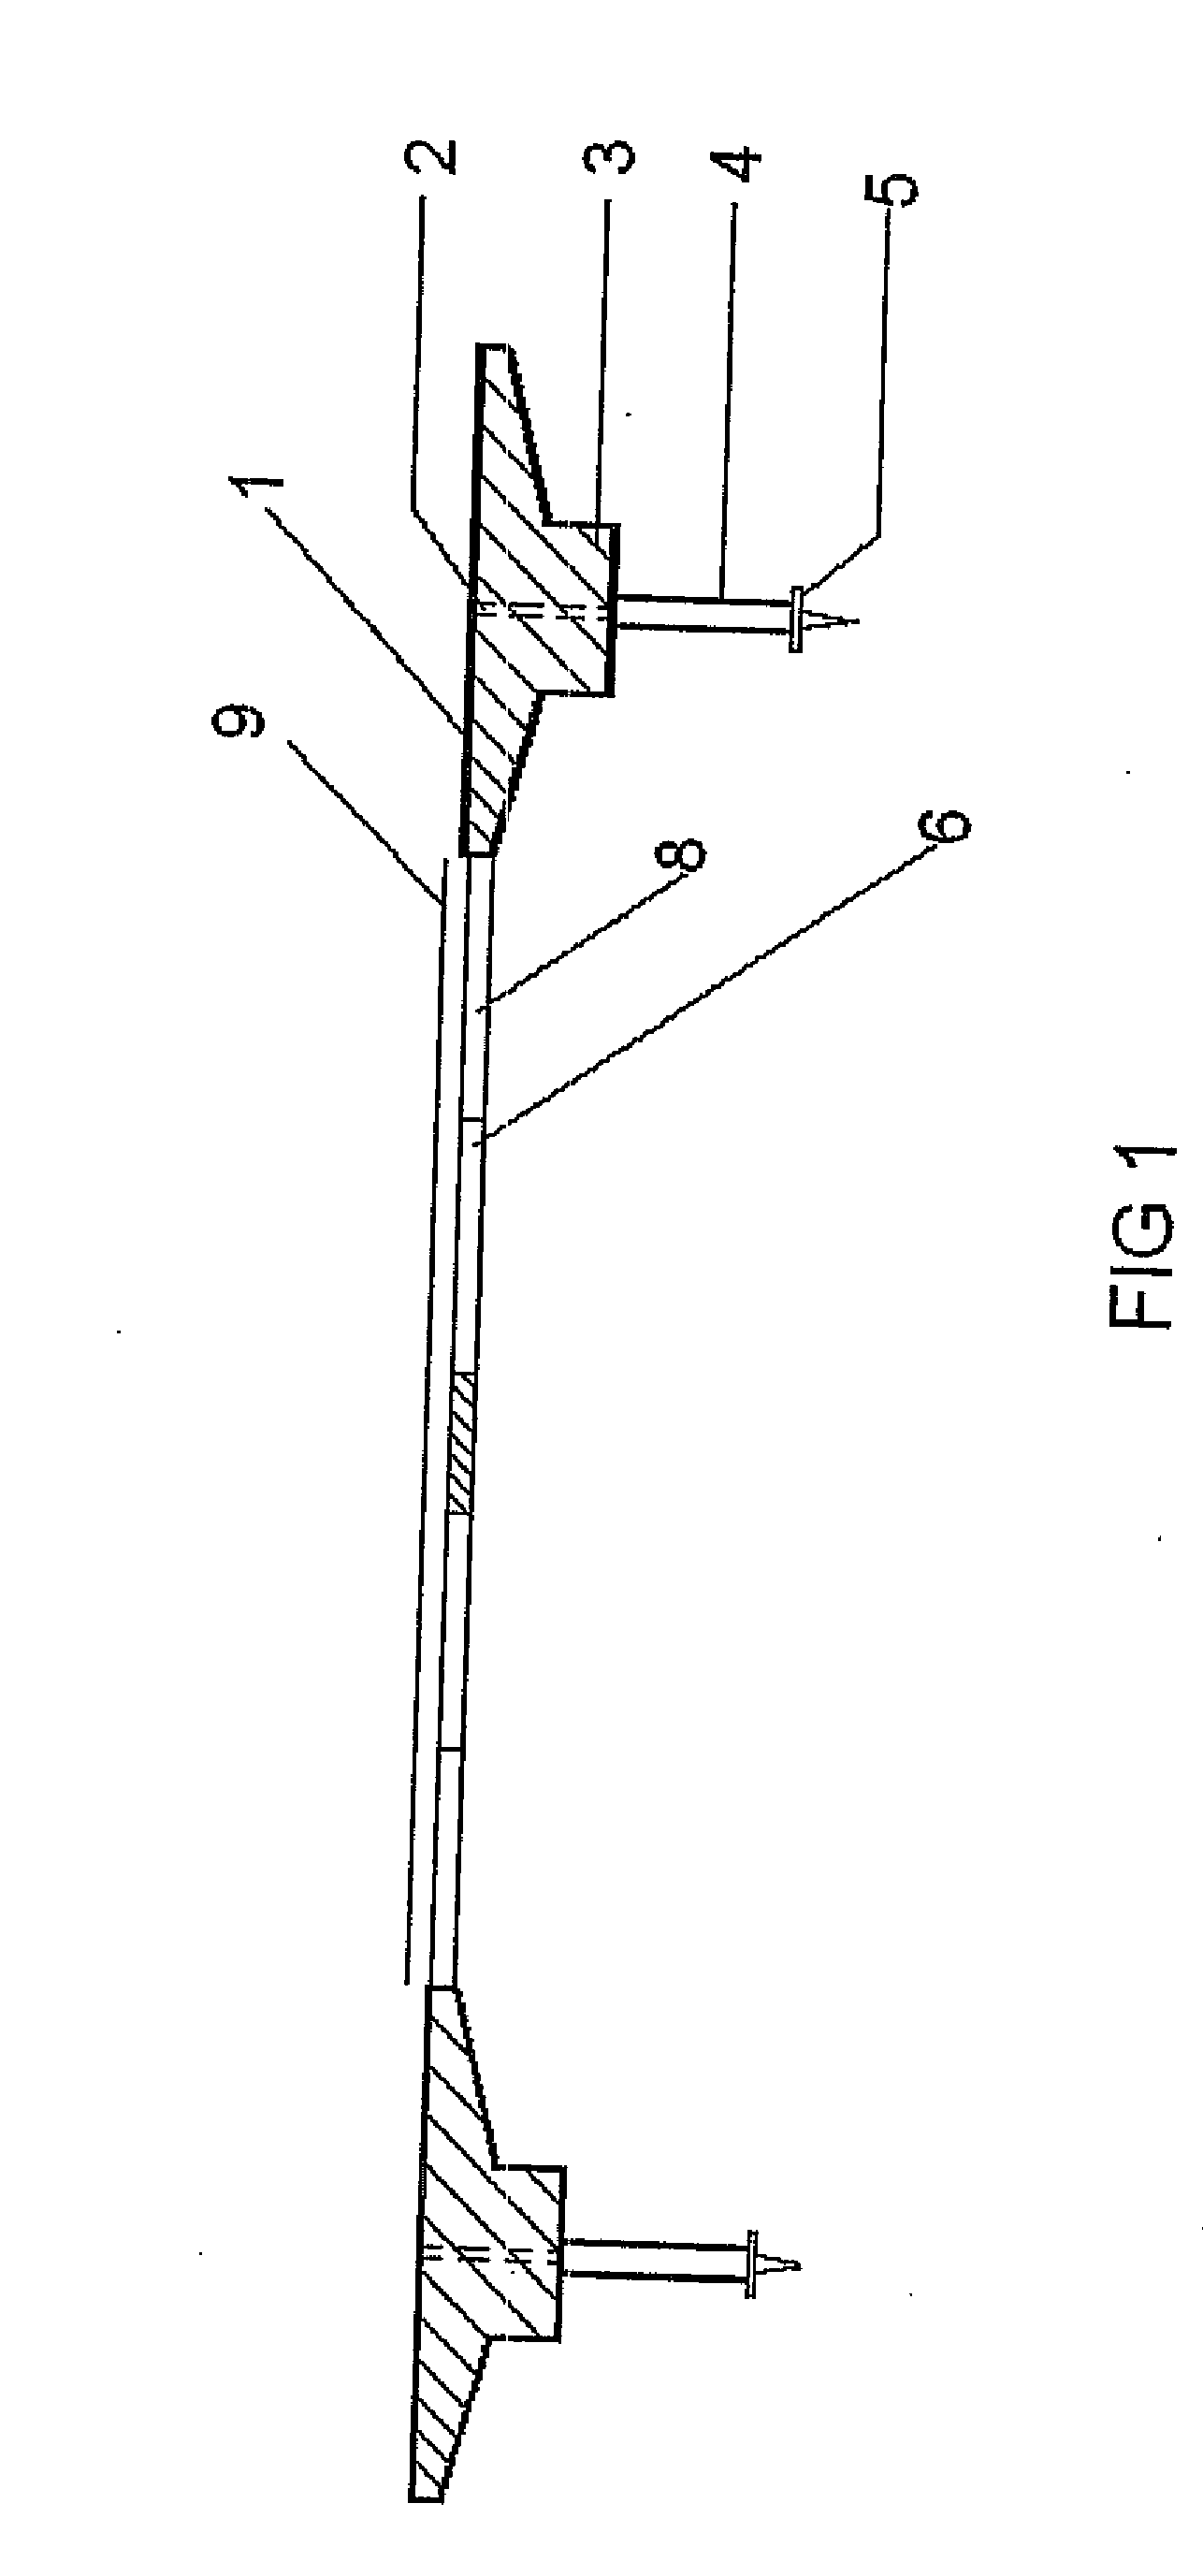 Device For Placing And Removing Birthday Candles at a Single Time On/From The Cake Regardless Of The Number of Candles